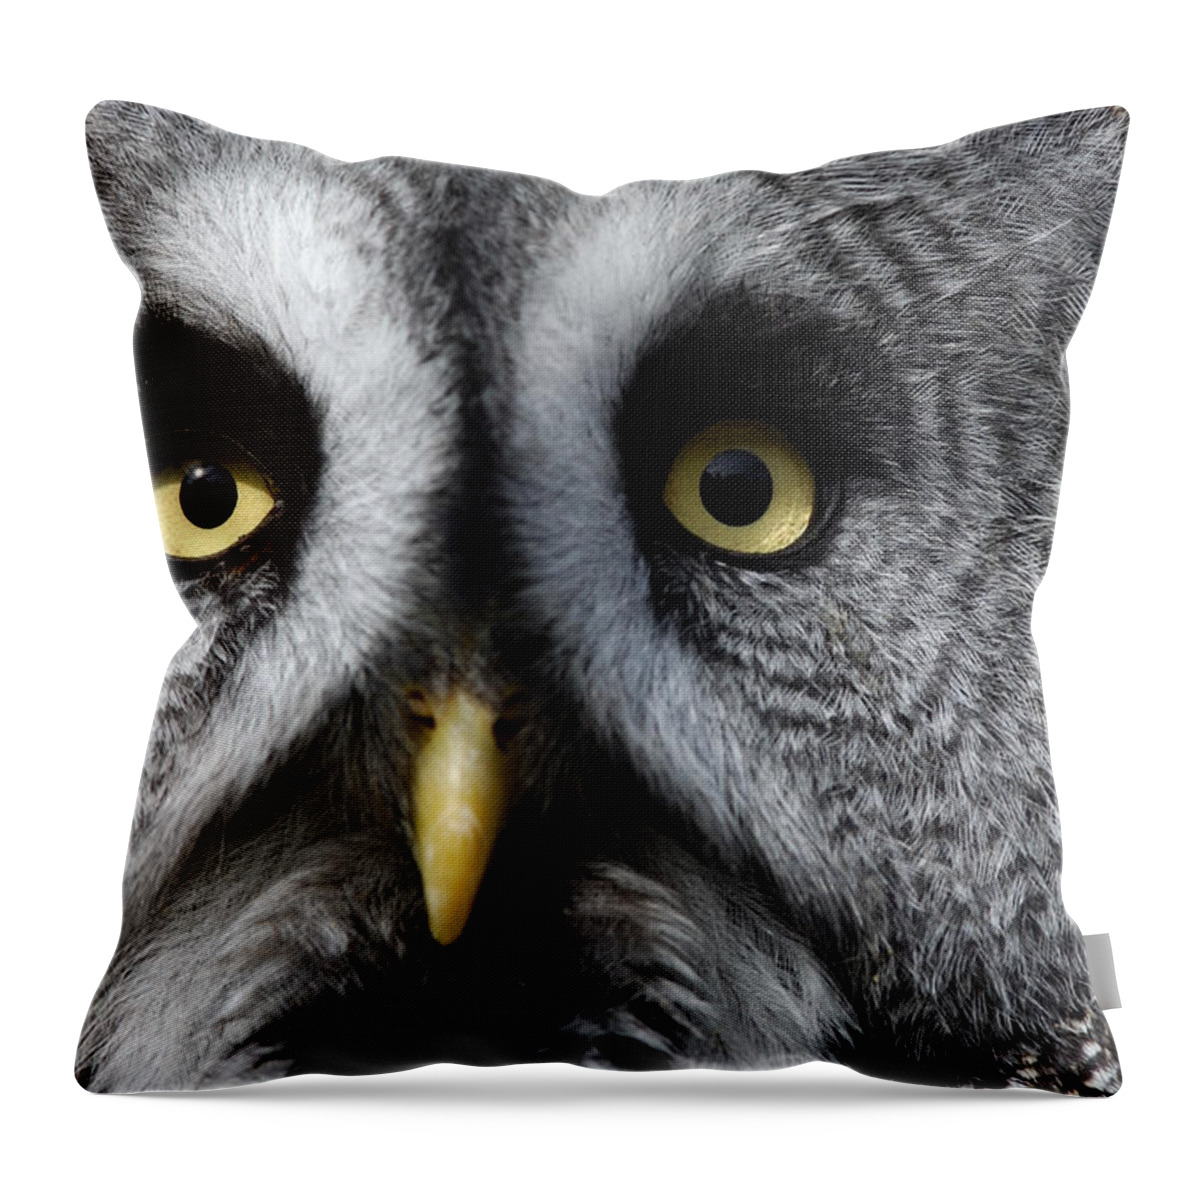 Flpa Throw Pillow featuring the photograph Great Grey Owl Finland by Malcolm Schuyl